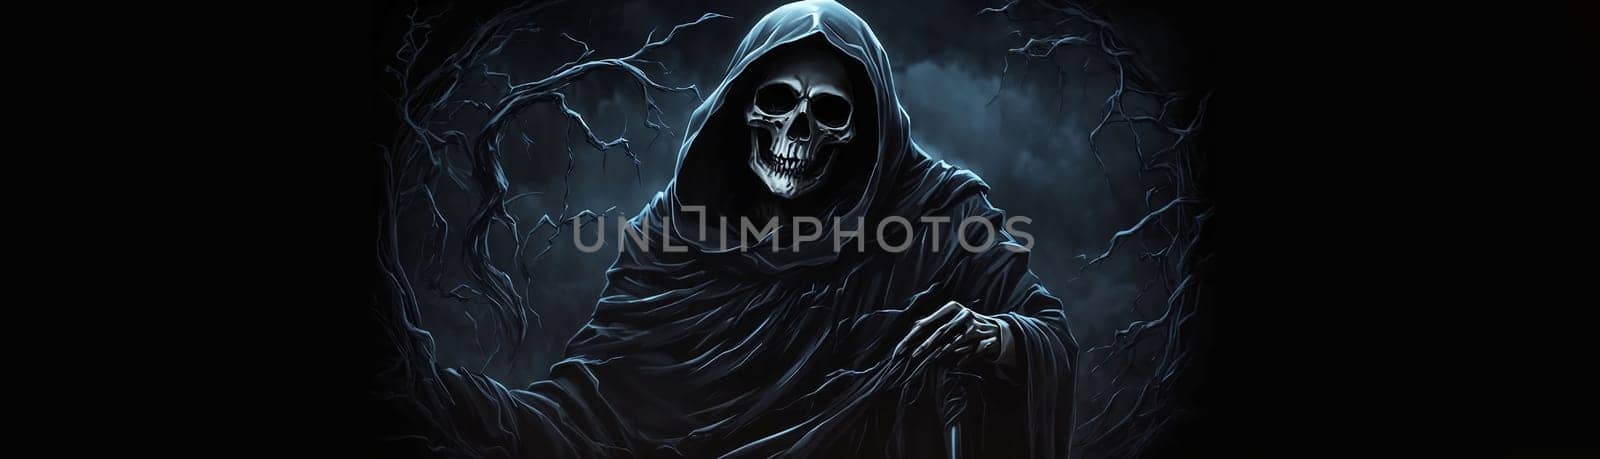 Grim reaper Haunted over dark misty background with copy space Vivid Halloween wallpaper background good for Halloweens card and invitation